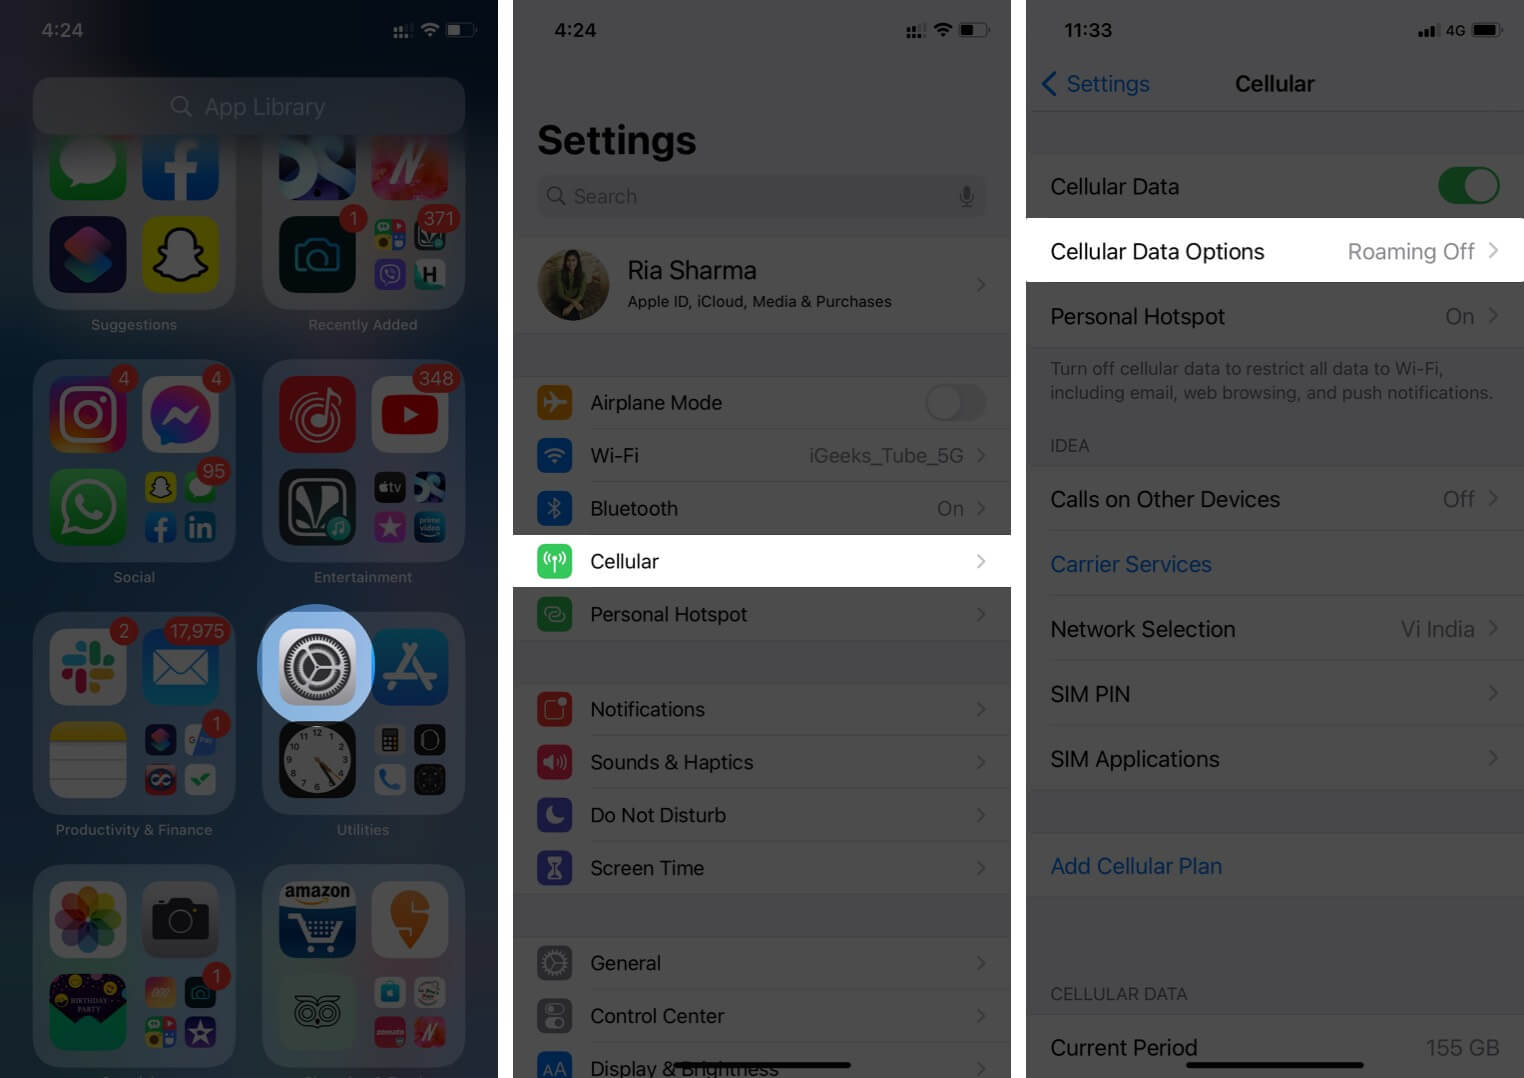 Open Settings Tap on Cellular and Tap Cellular Data Option on iPhone